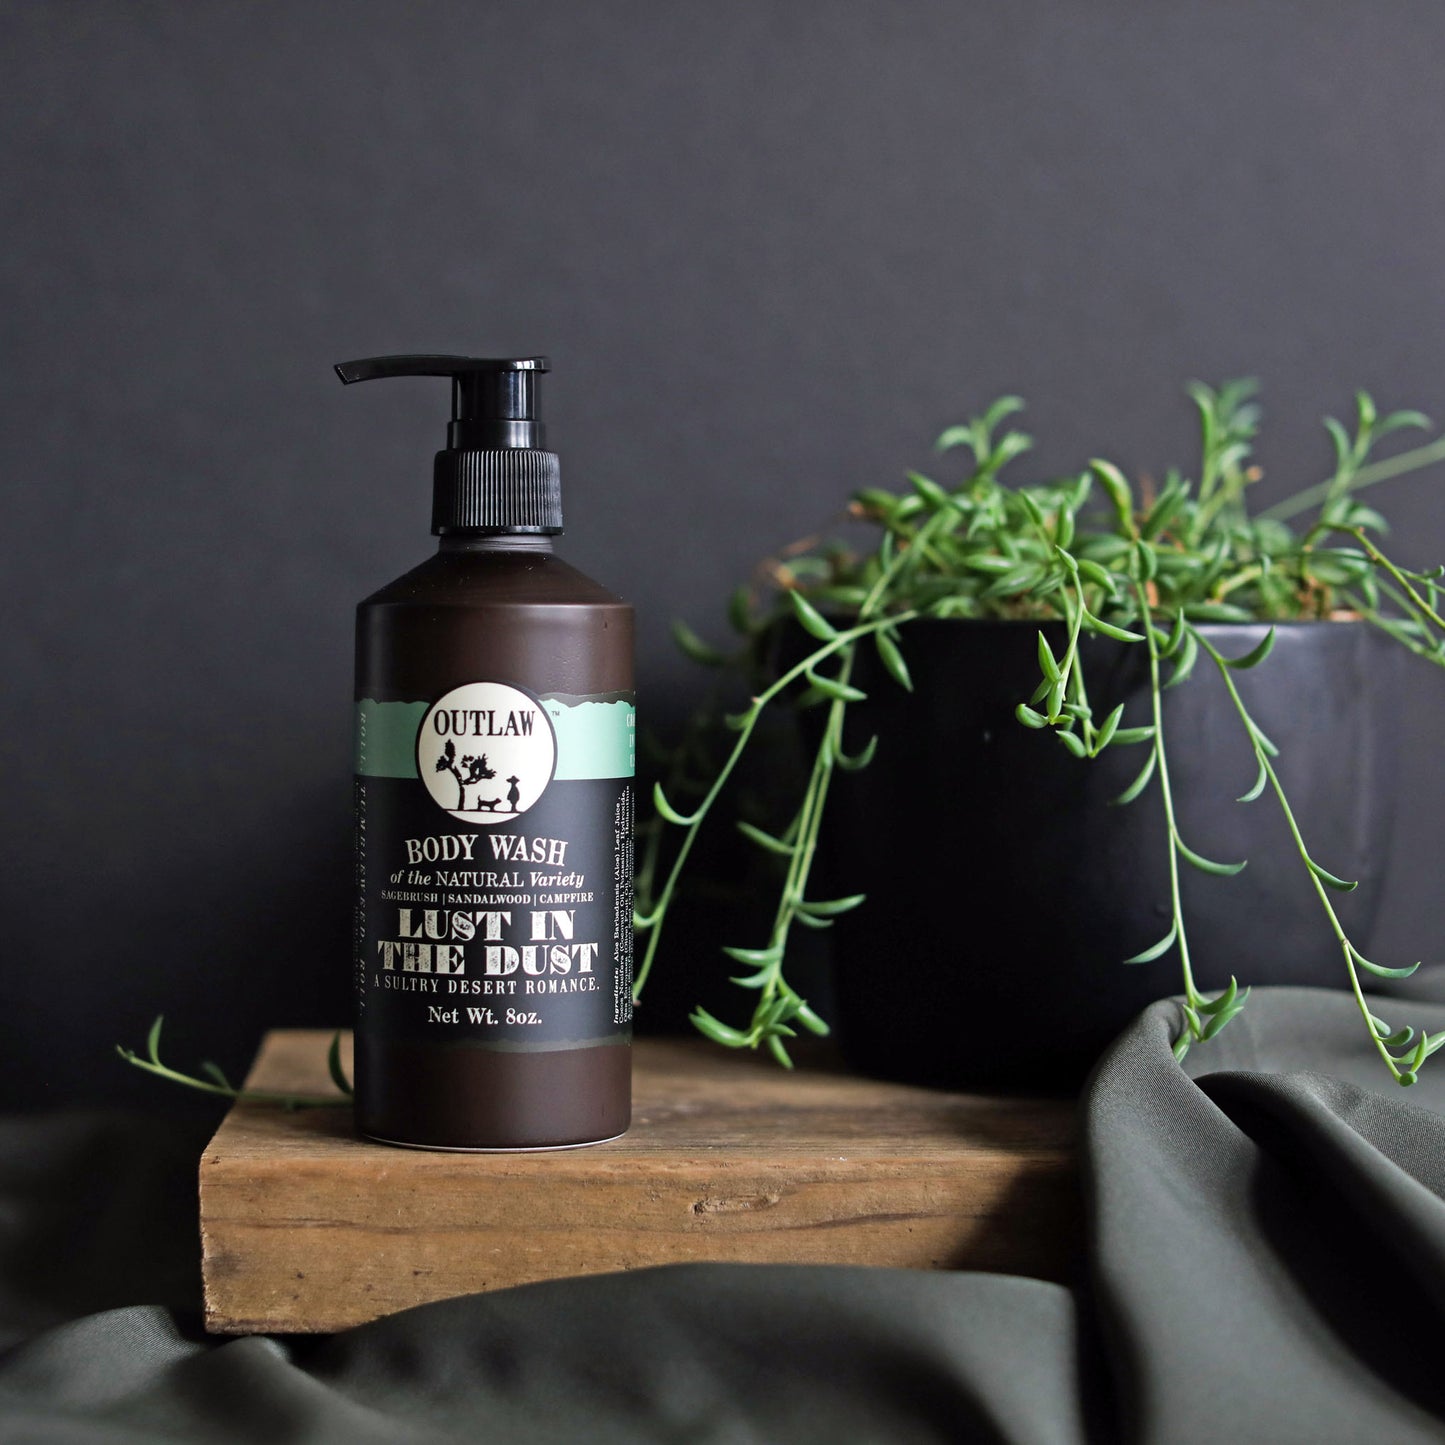 Sagebrush and campfire scented natural body wash by Outlaw